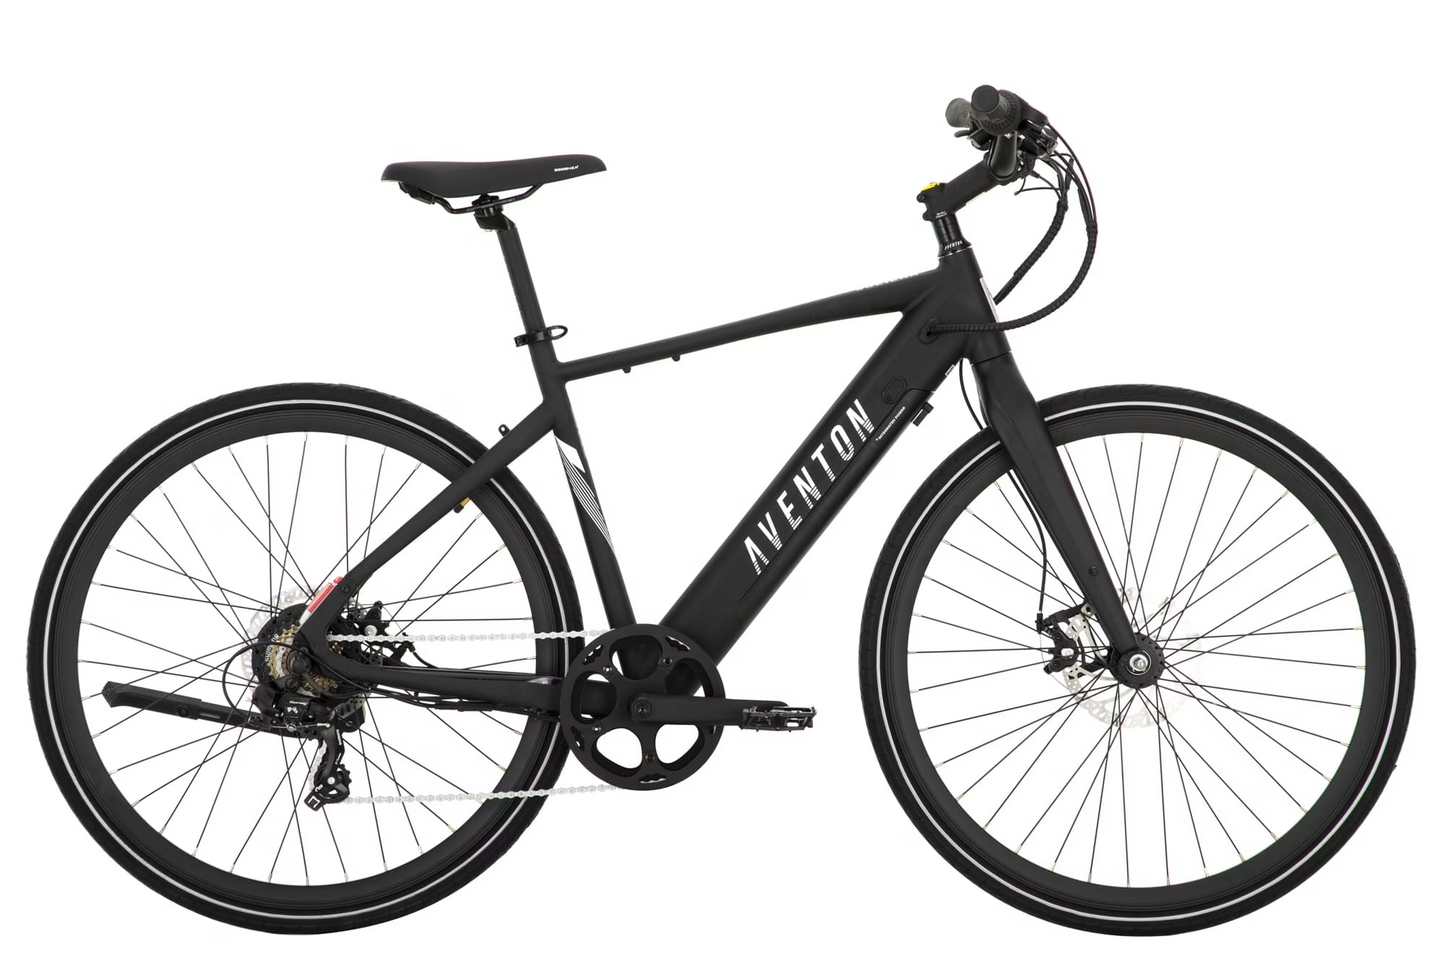 A black Aventon - Soltera.2 electric bike with straight handlebars, a sleek frame, black wheels, and a chain-driven drivetrain. It features a torque sensor for smooth rides and a long-range battery for extended journeys.